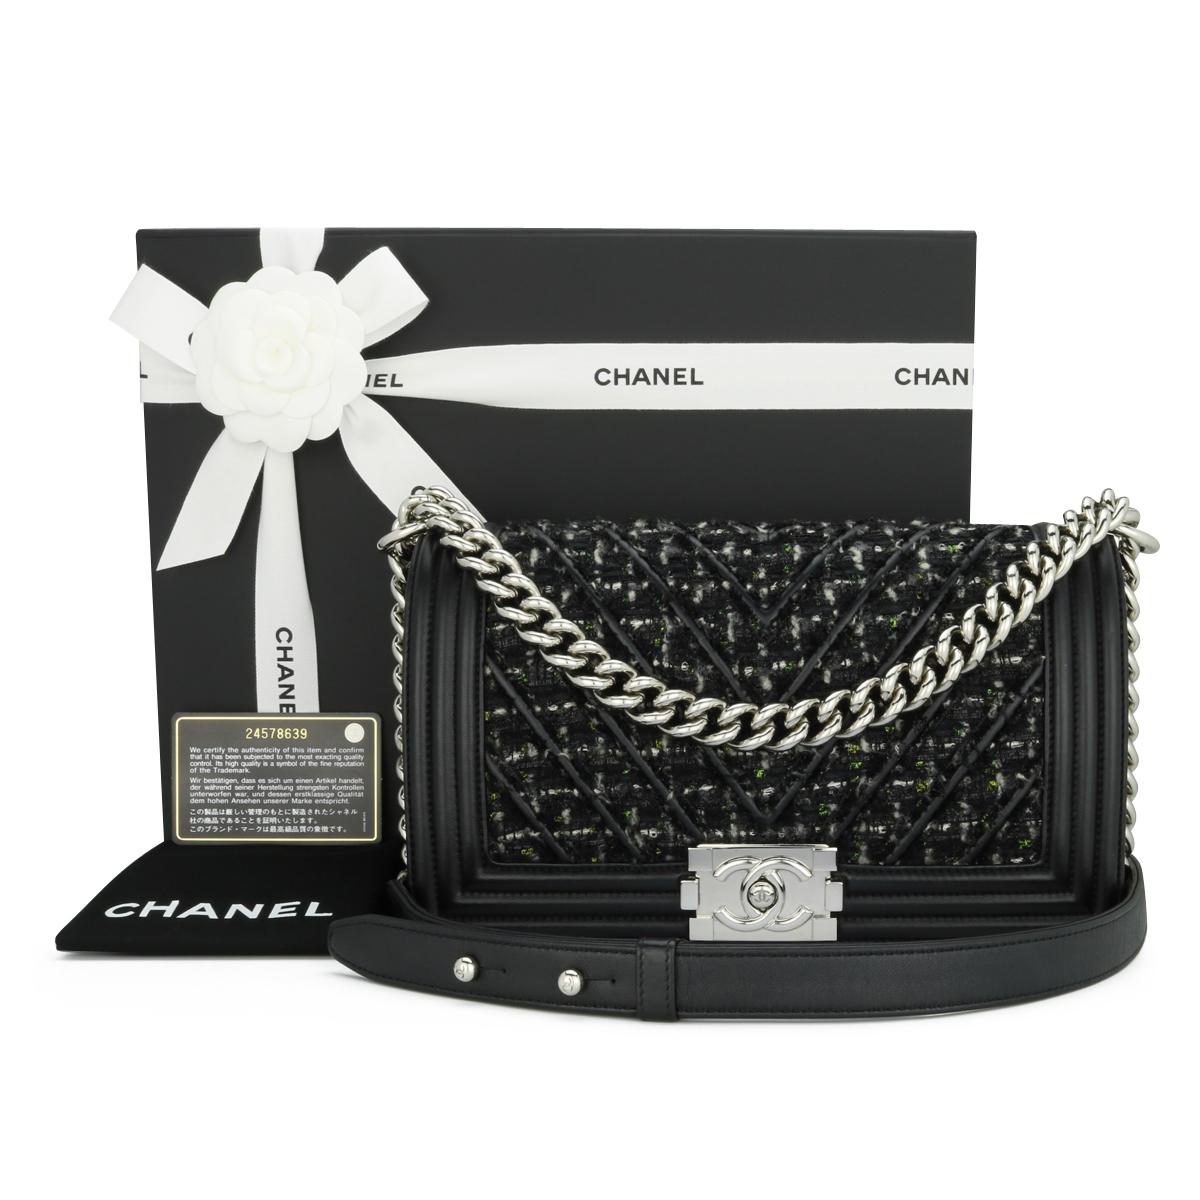 CHANEL Old Medium Chevron Boy Bag in Black Lambskin/Tweed with Shiny Silver Hardware 2017 – 17B.

This stunning bag is still in good condition, the bag still holds its original shape well, and the hardware is still very clean and shiny.

- Exterior